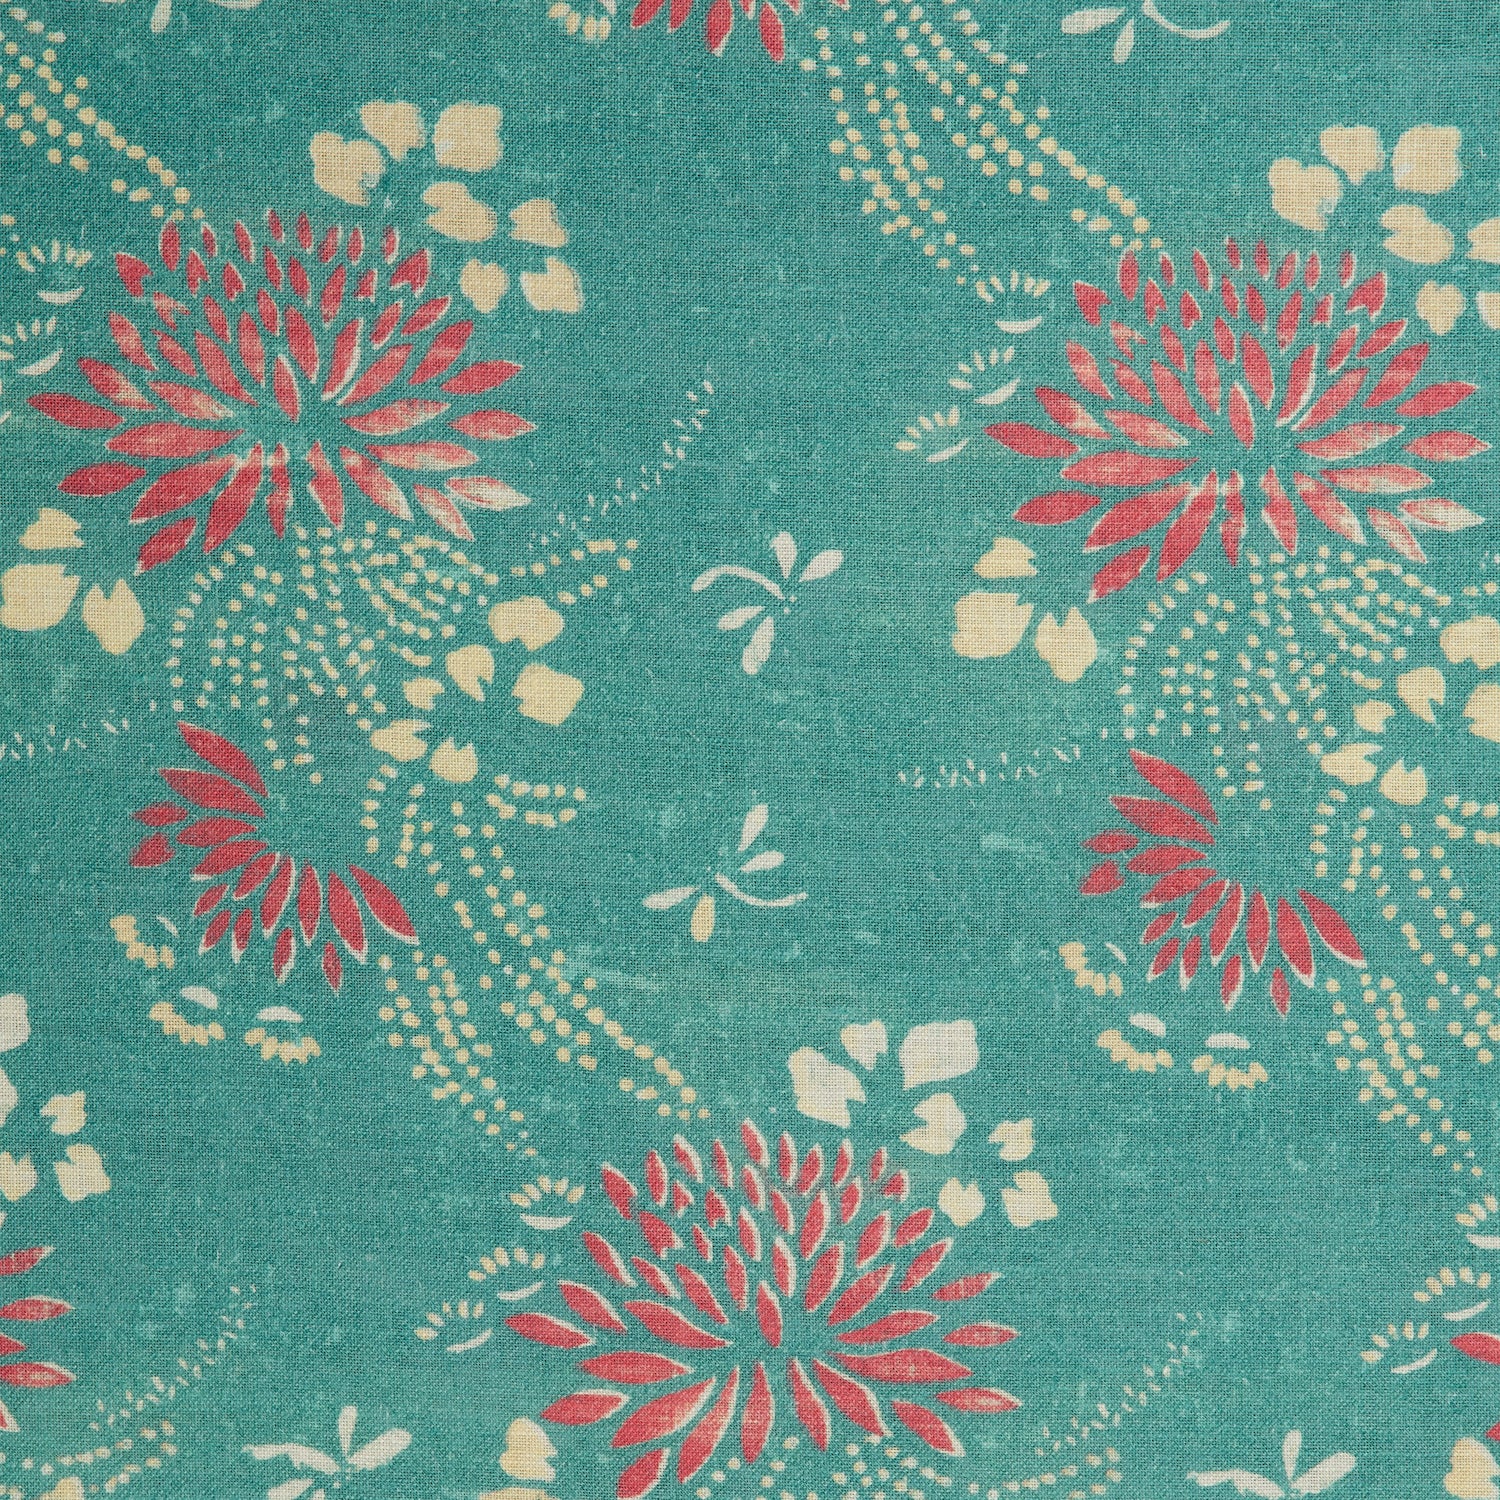 Detail of a linen fabric in a floral and dot pattern in red and beige on a turquoise field.